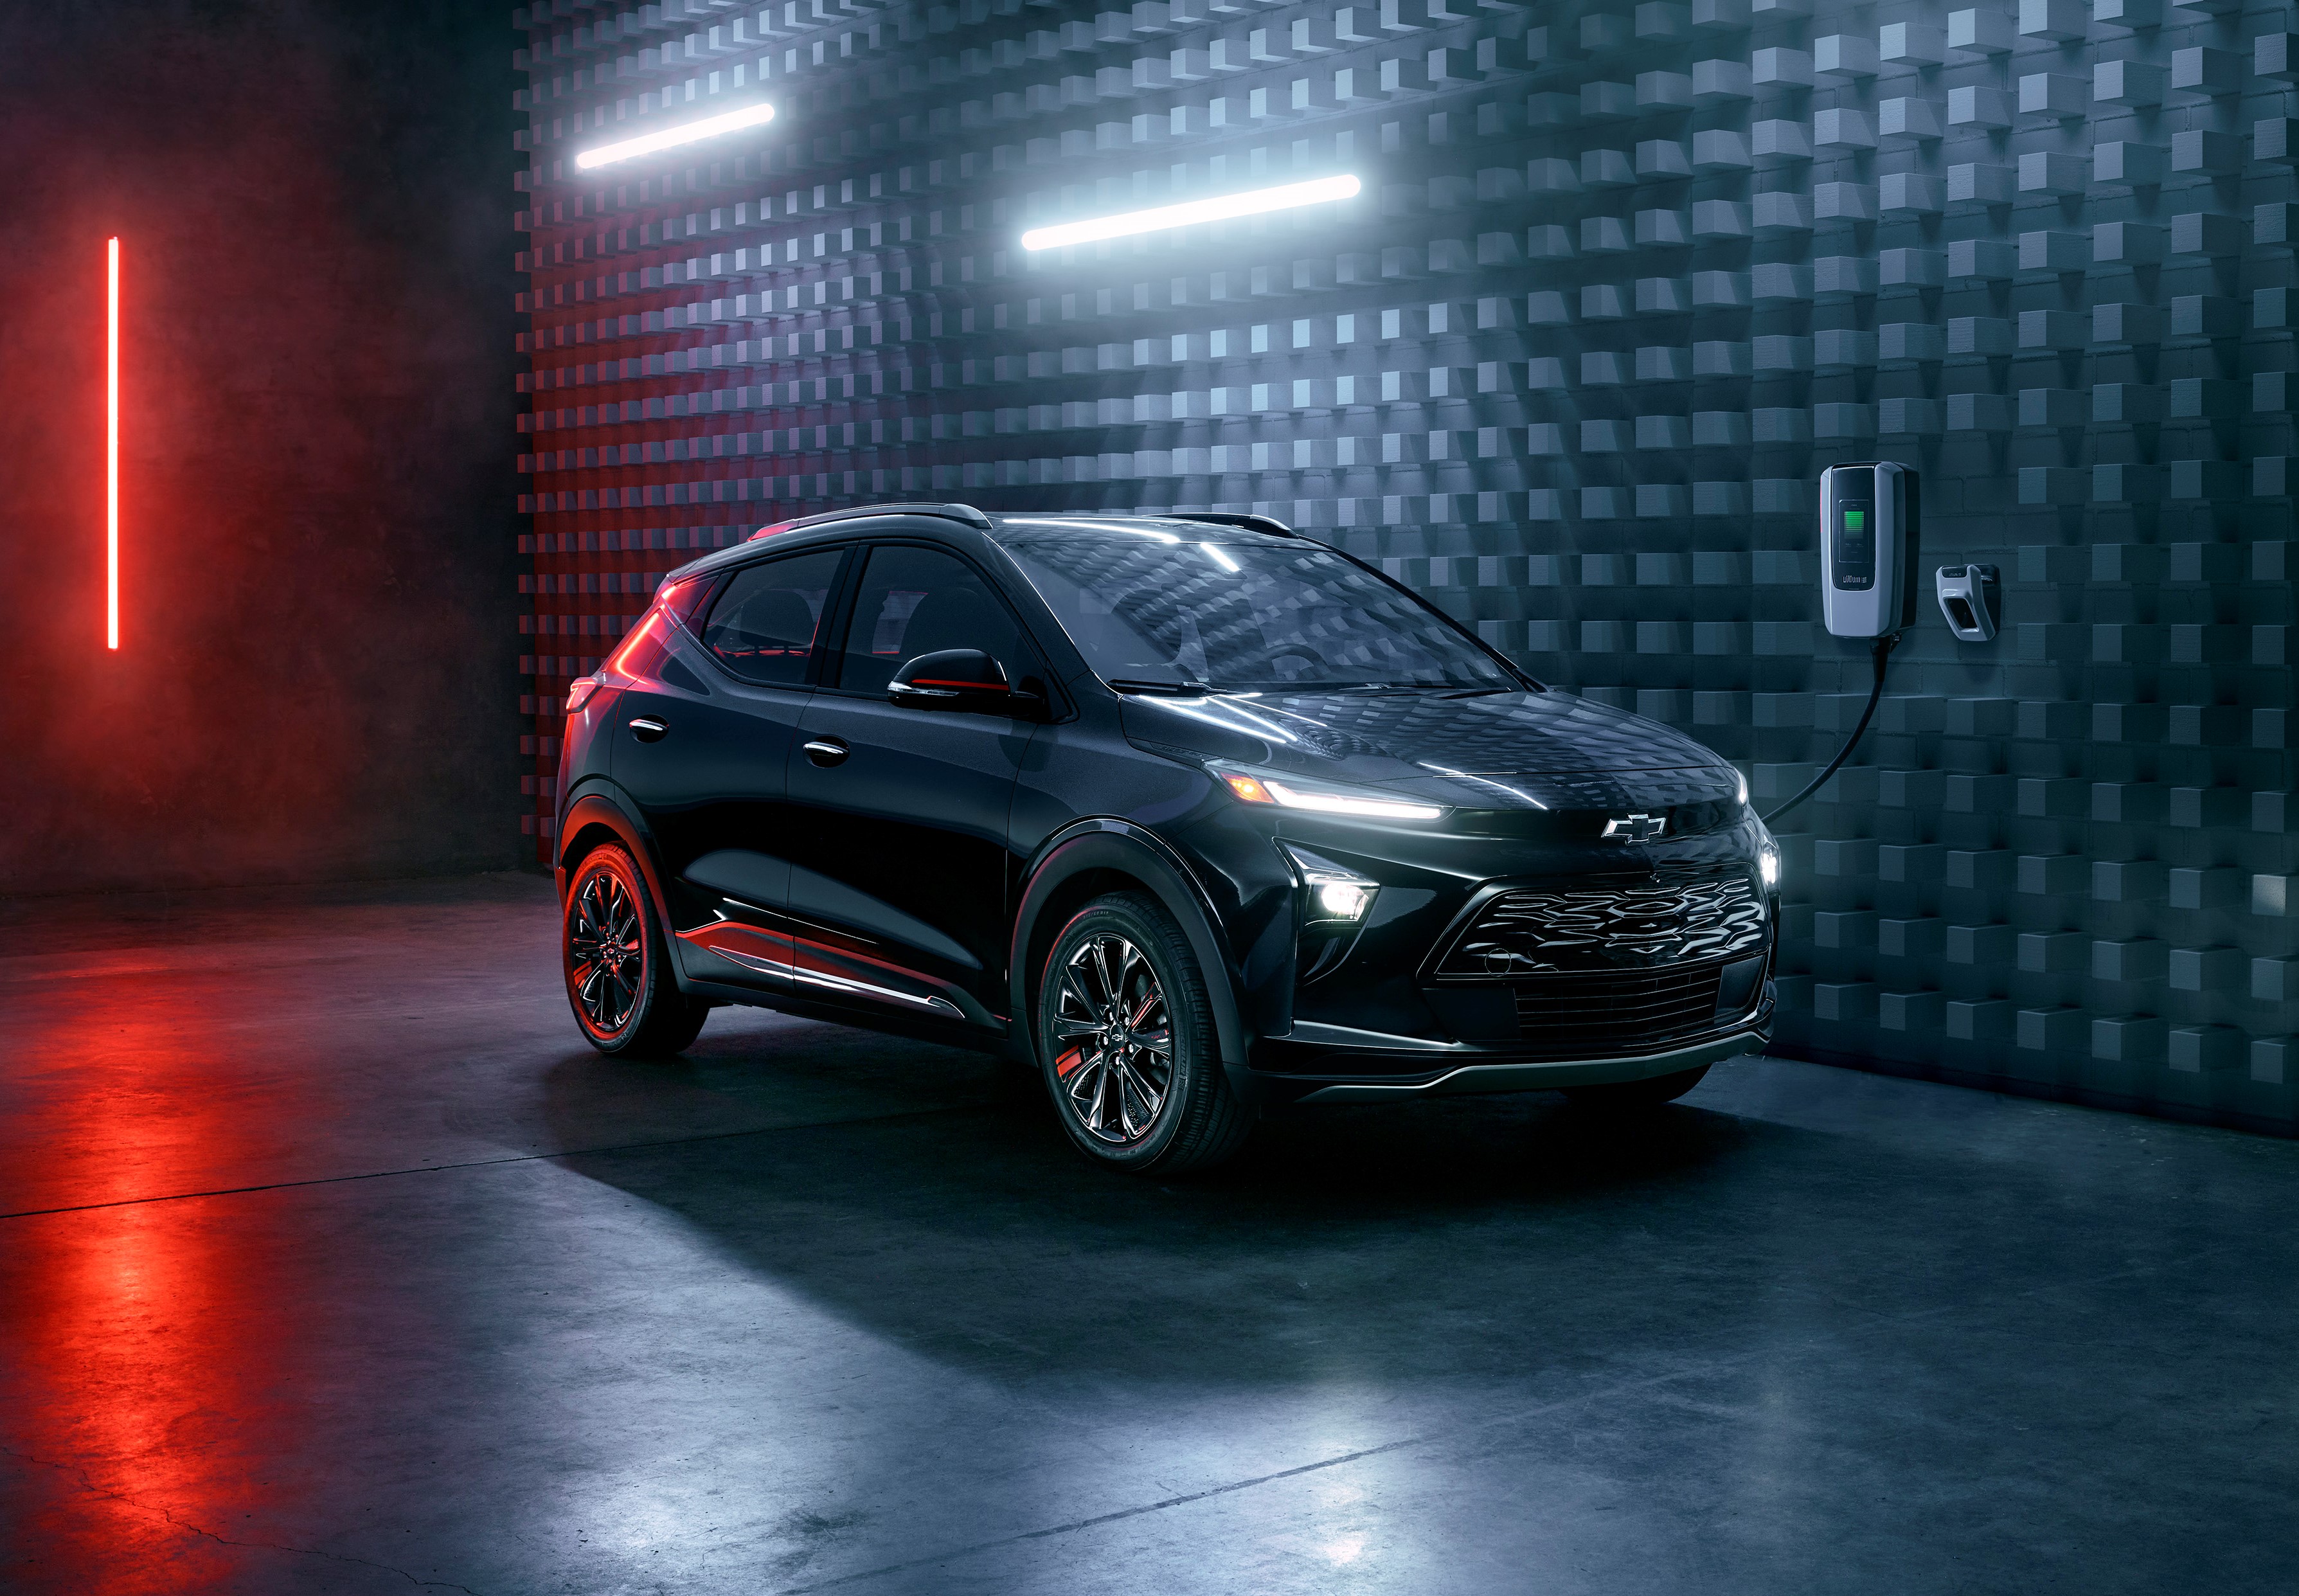 GM drops $6,000 off the sticker price of 2023 Chevy Bolts